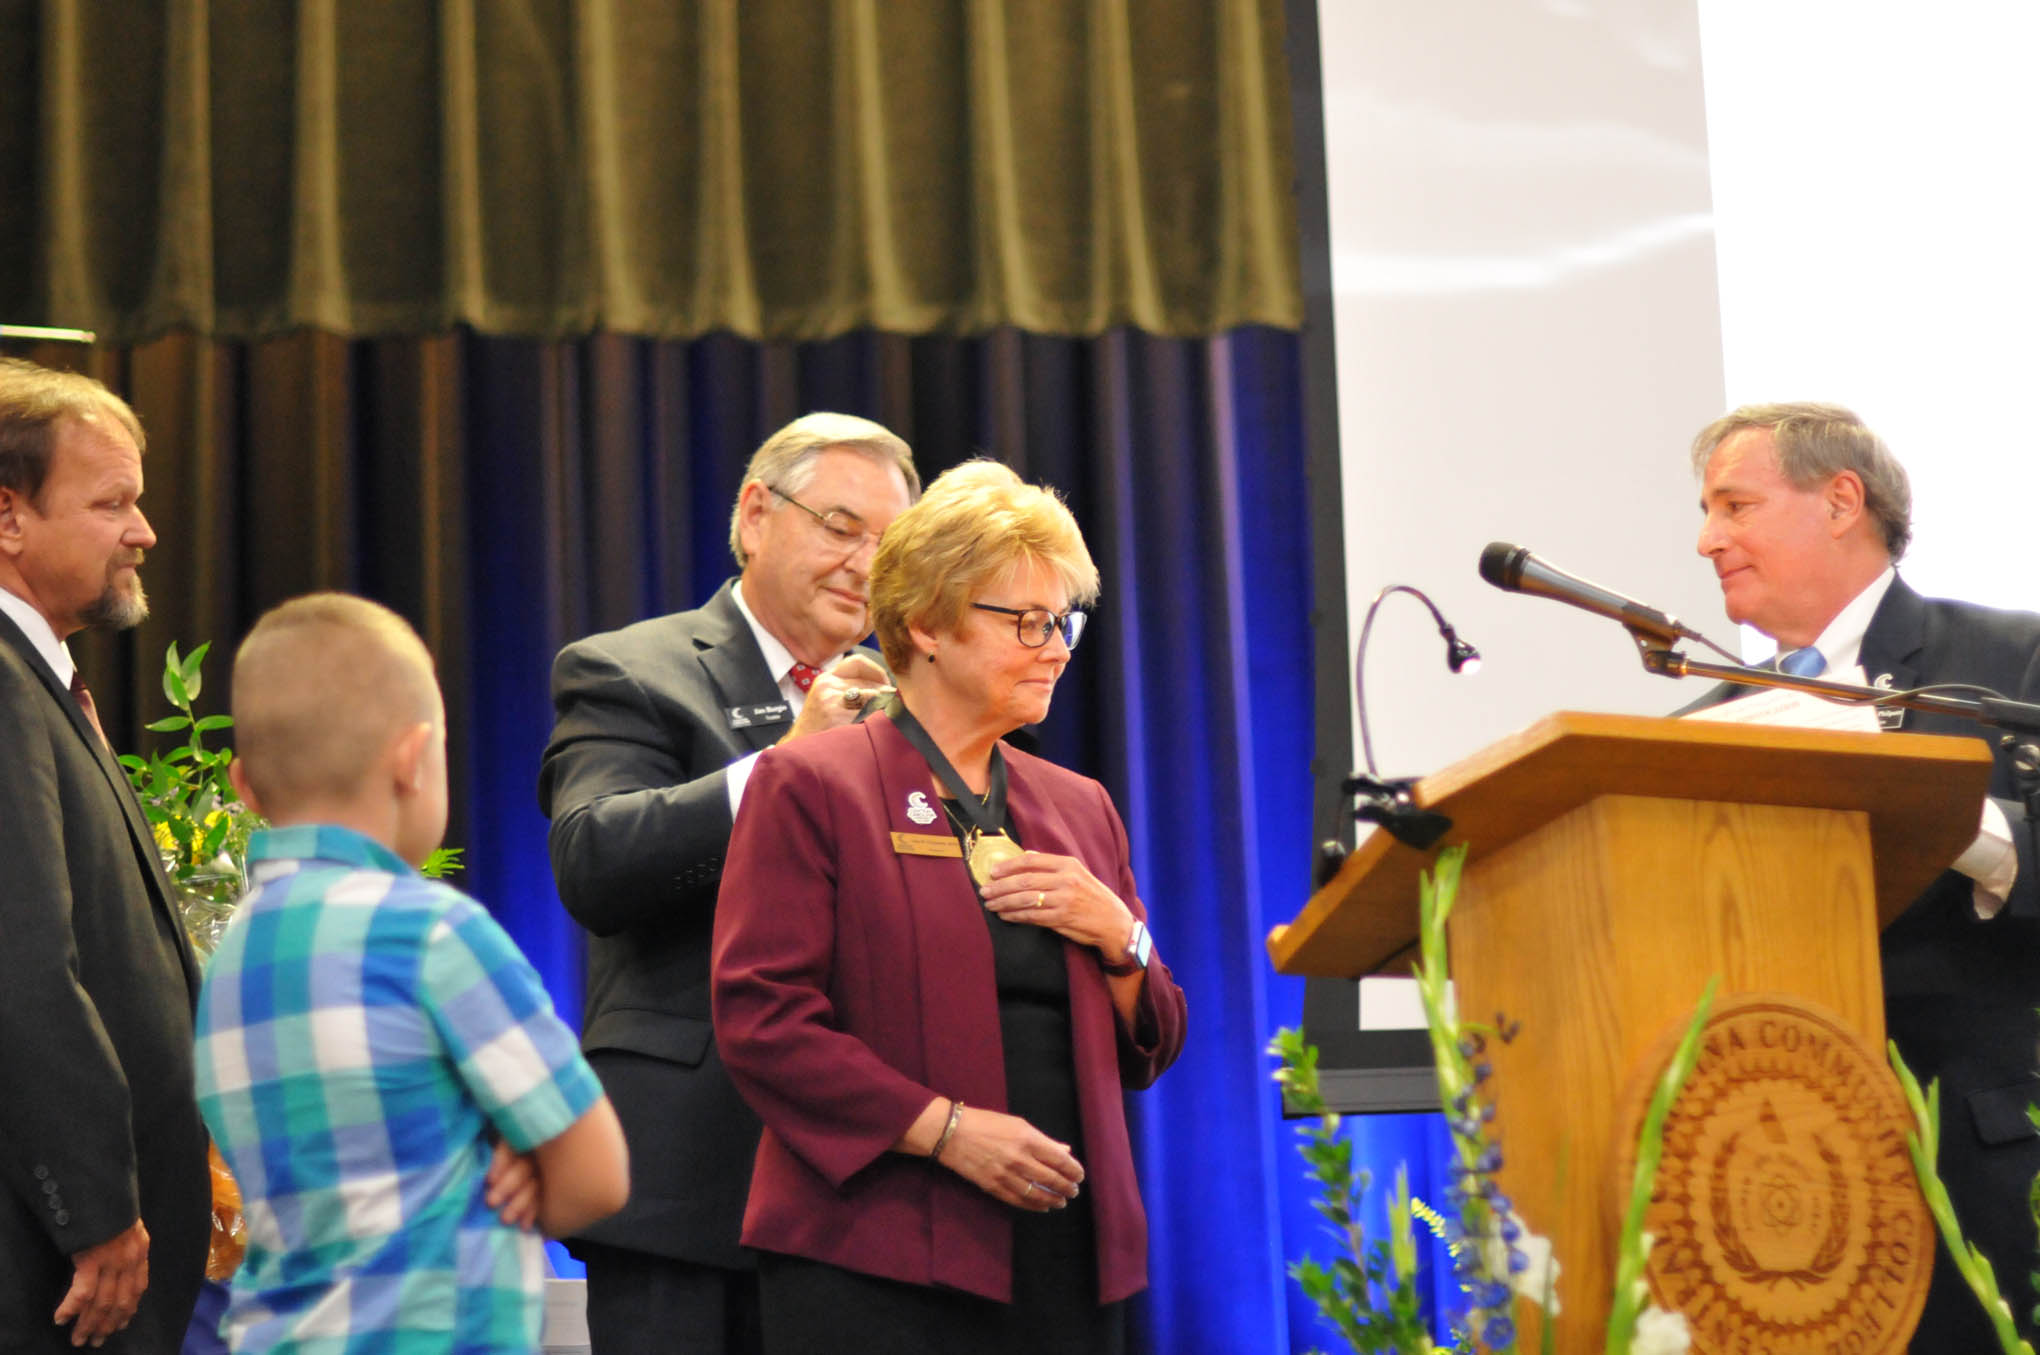 Dr. Lisa M. Chapman installed as CCCC President